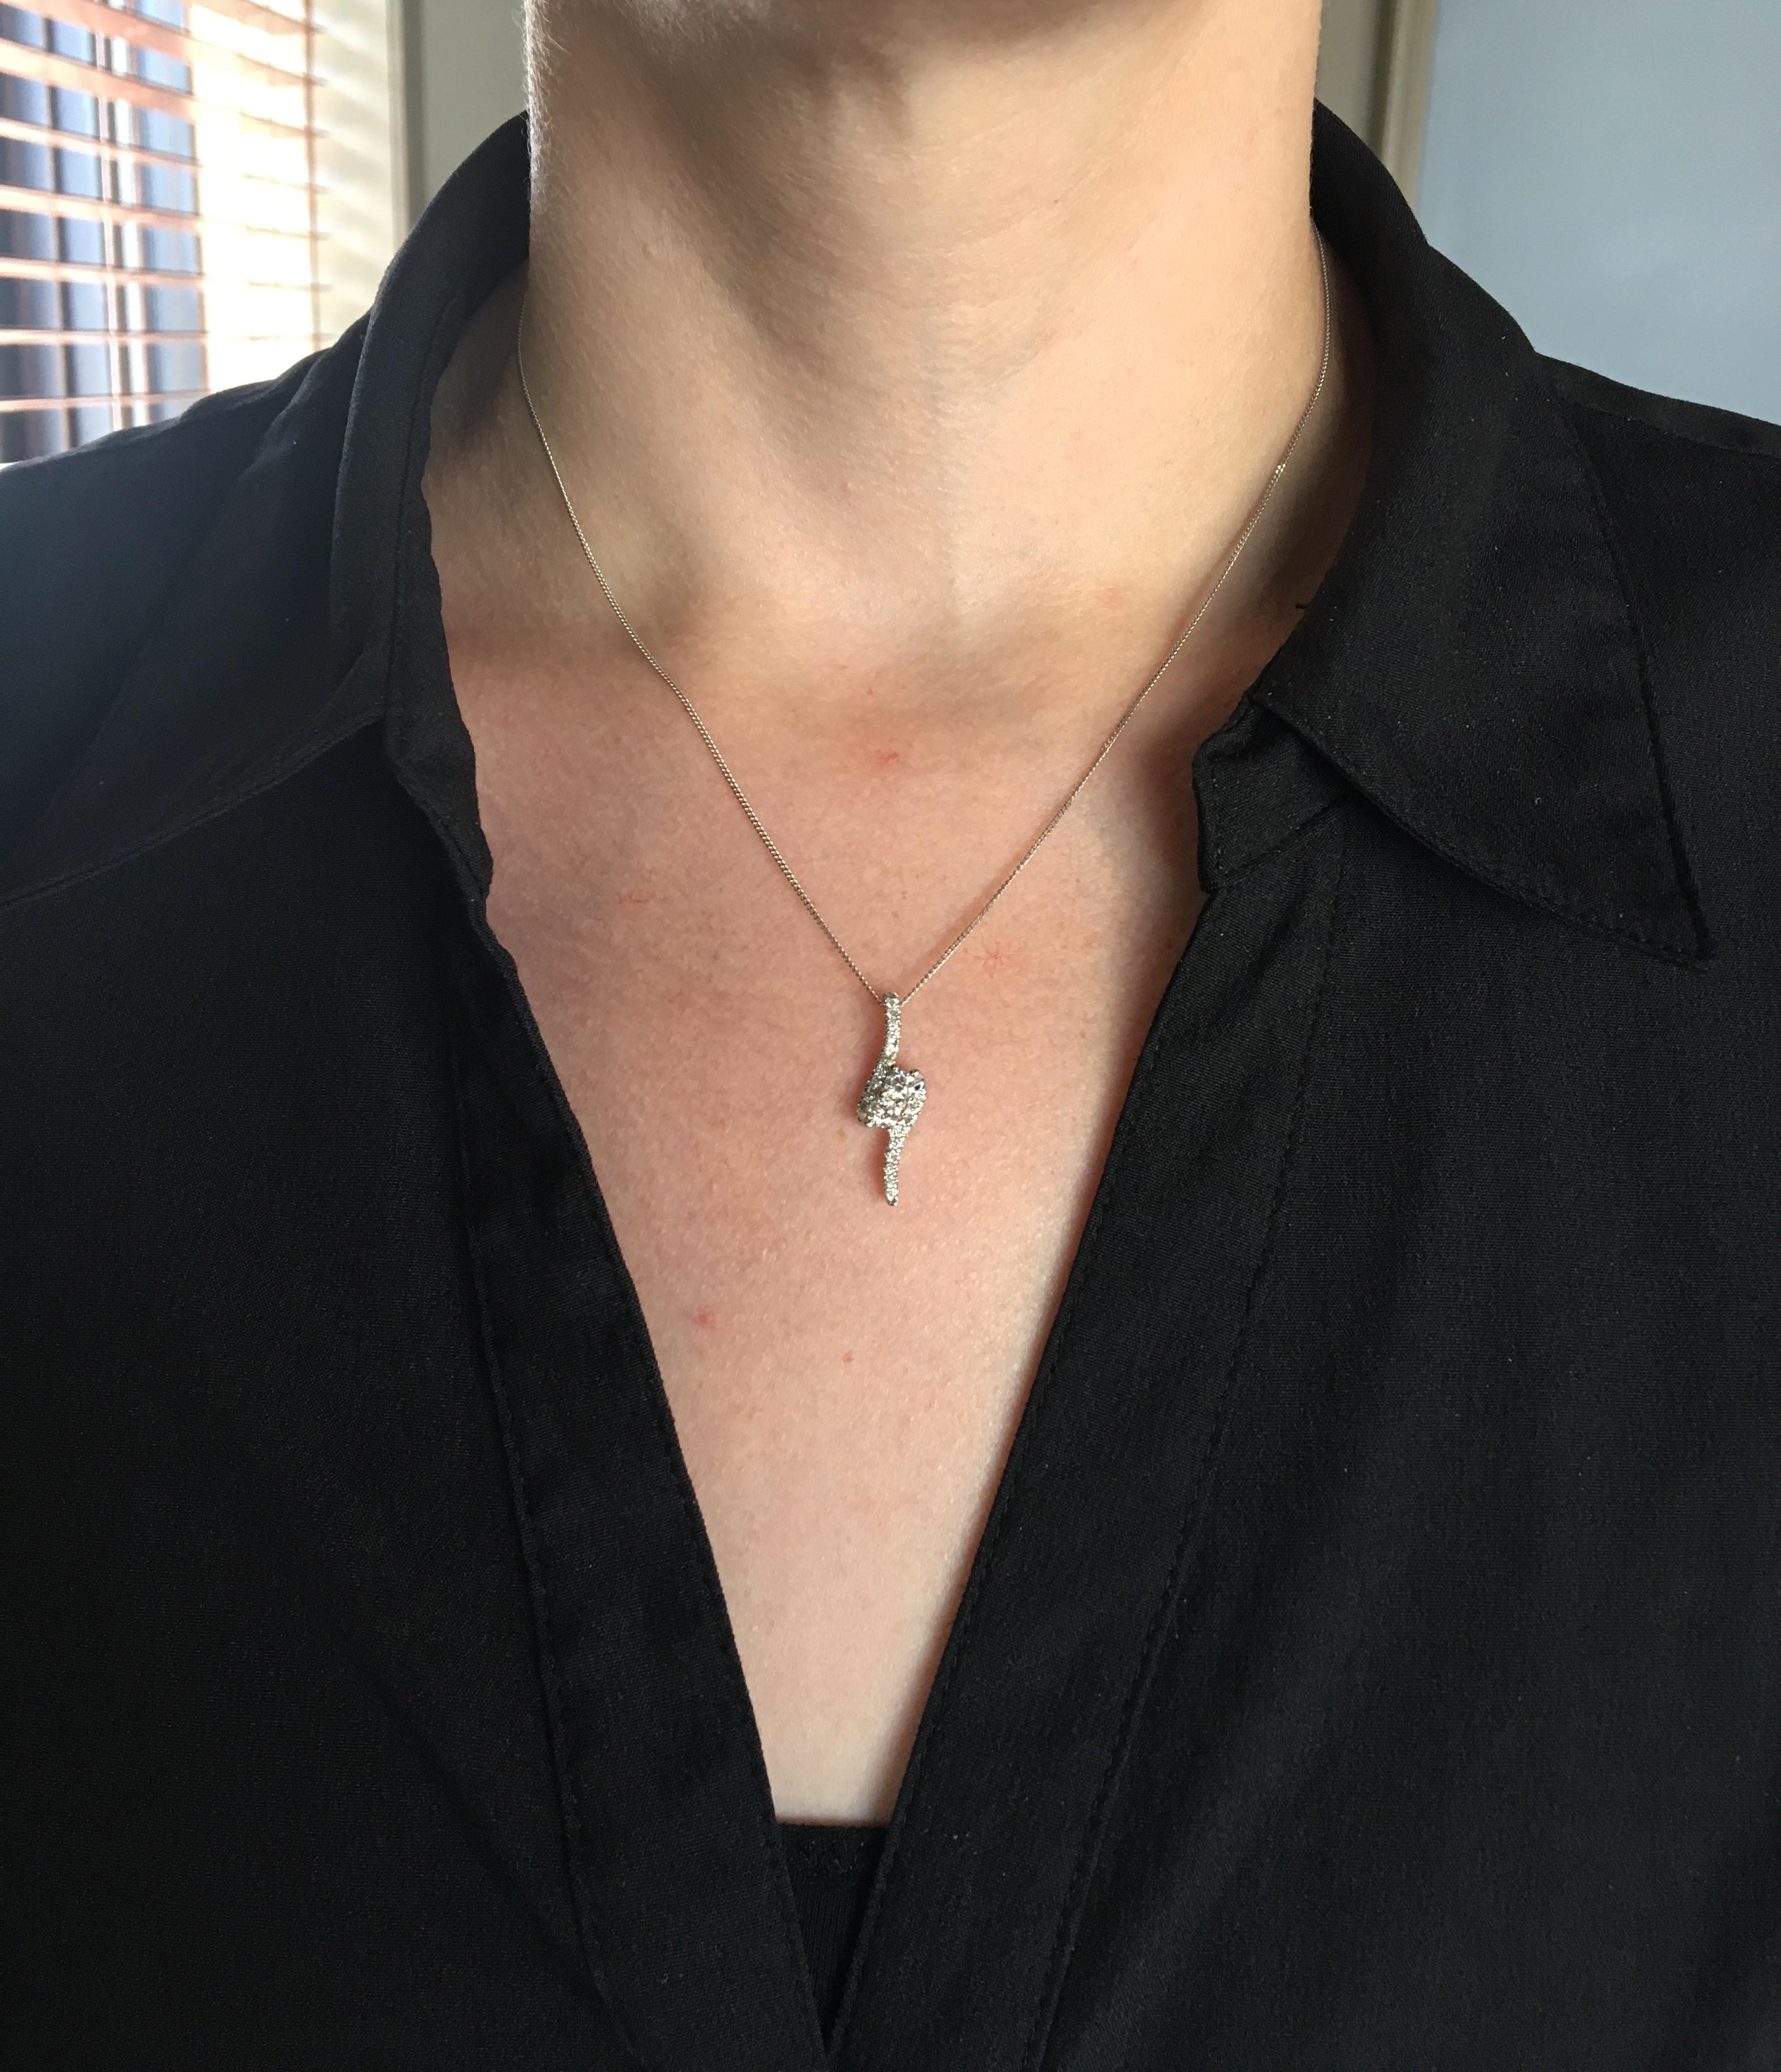 Ever Us bypass style diamond pendant necklace crafted in 14k white gold.

Total Diamond Carat Weight: Approximately .50CTW
Diamond Cut: Round Brilliant Cut
Color: Average G-I
Clarity: Average SI-I
Metal: 14K White Gold
Marked/Tested: Stamped “Ever